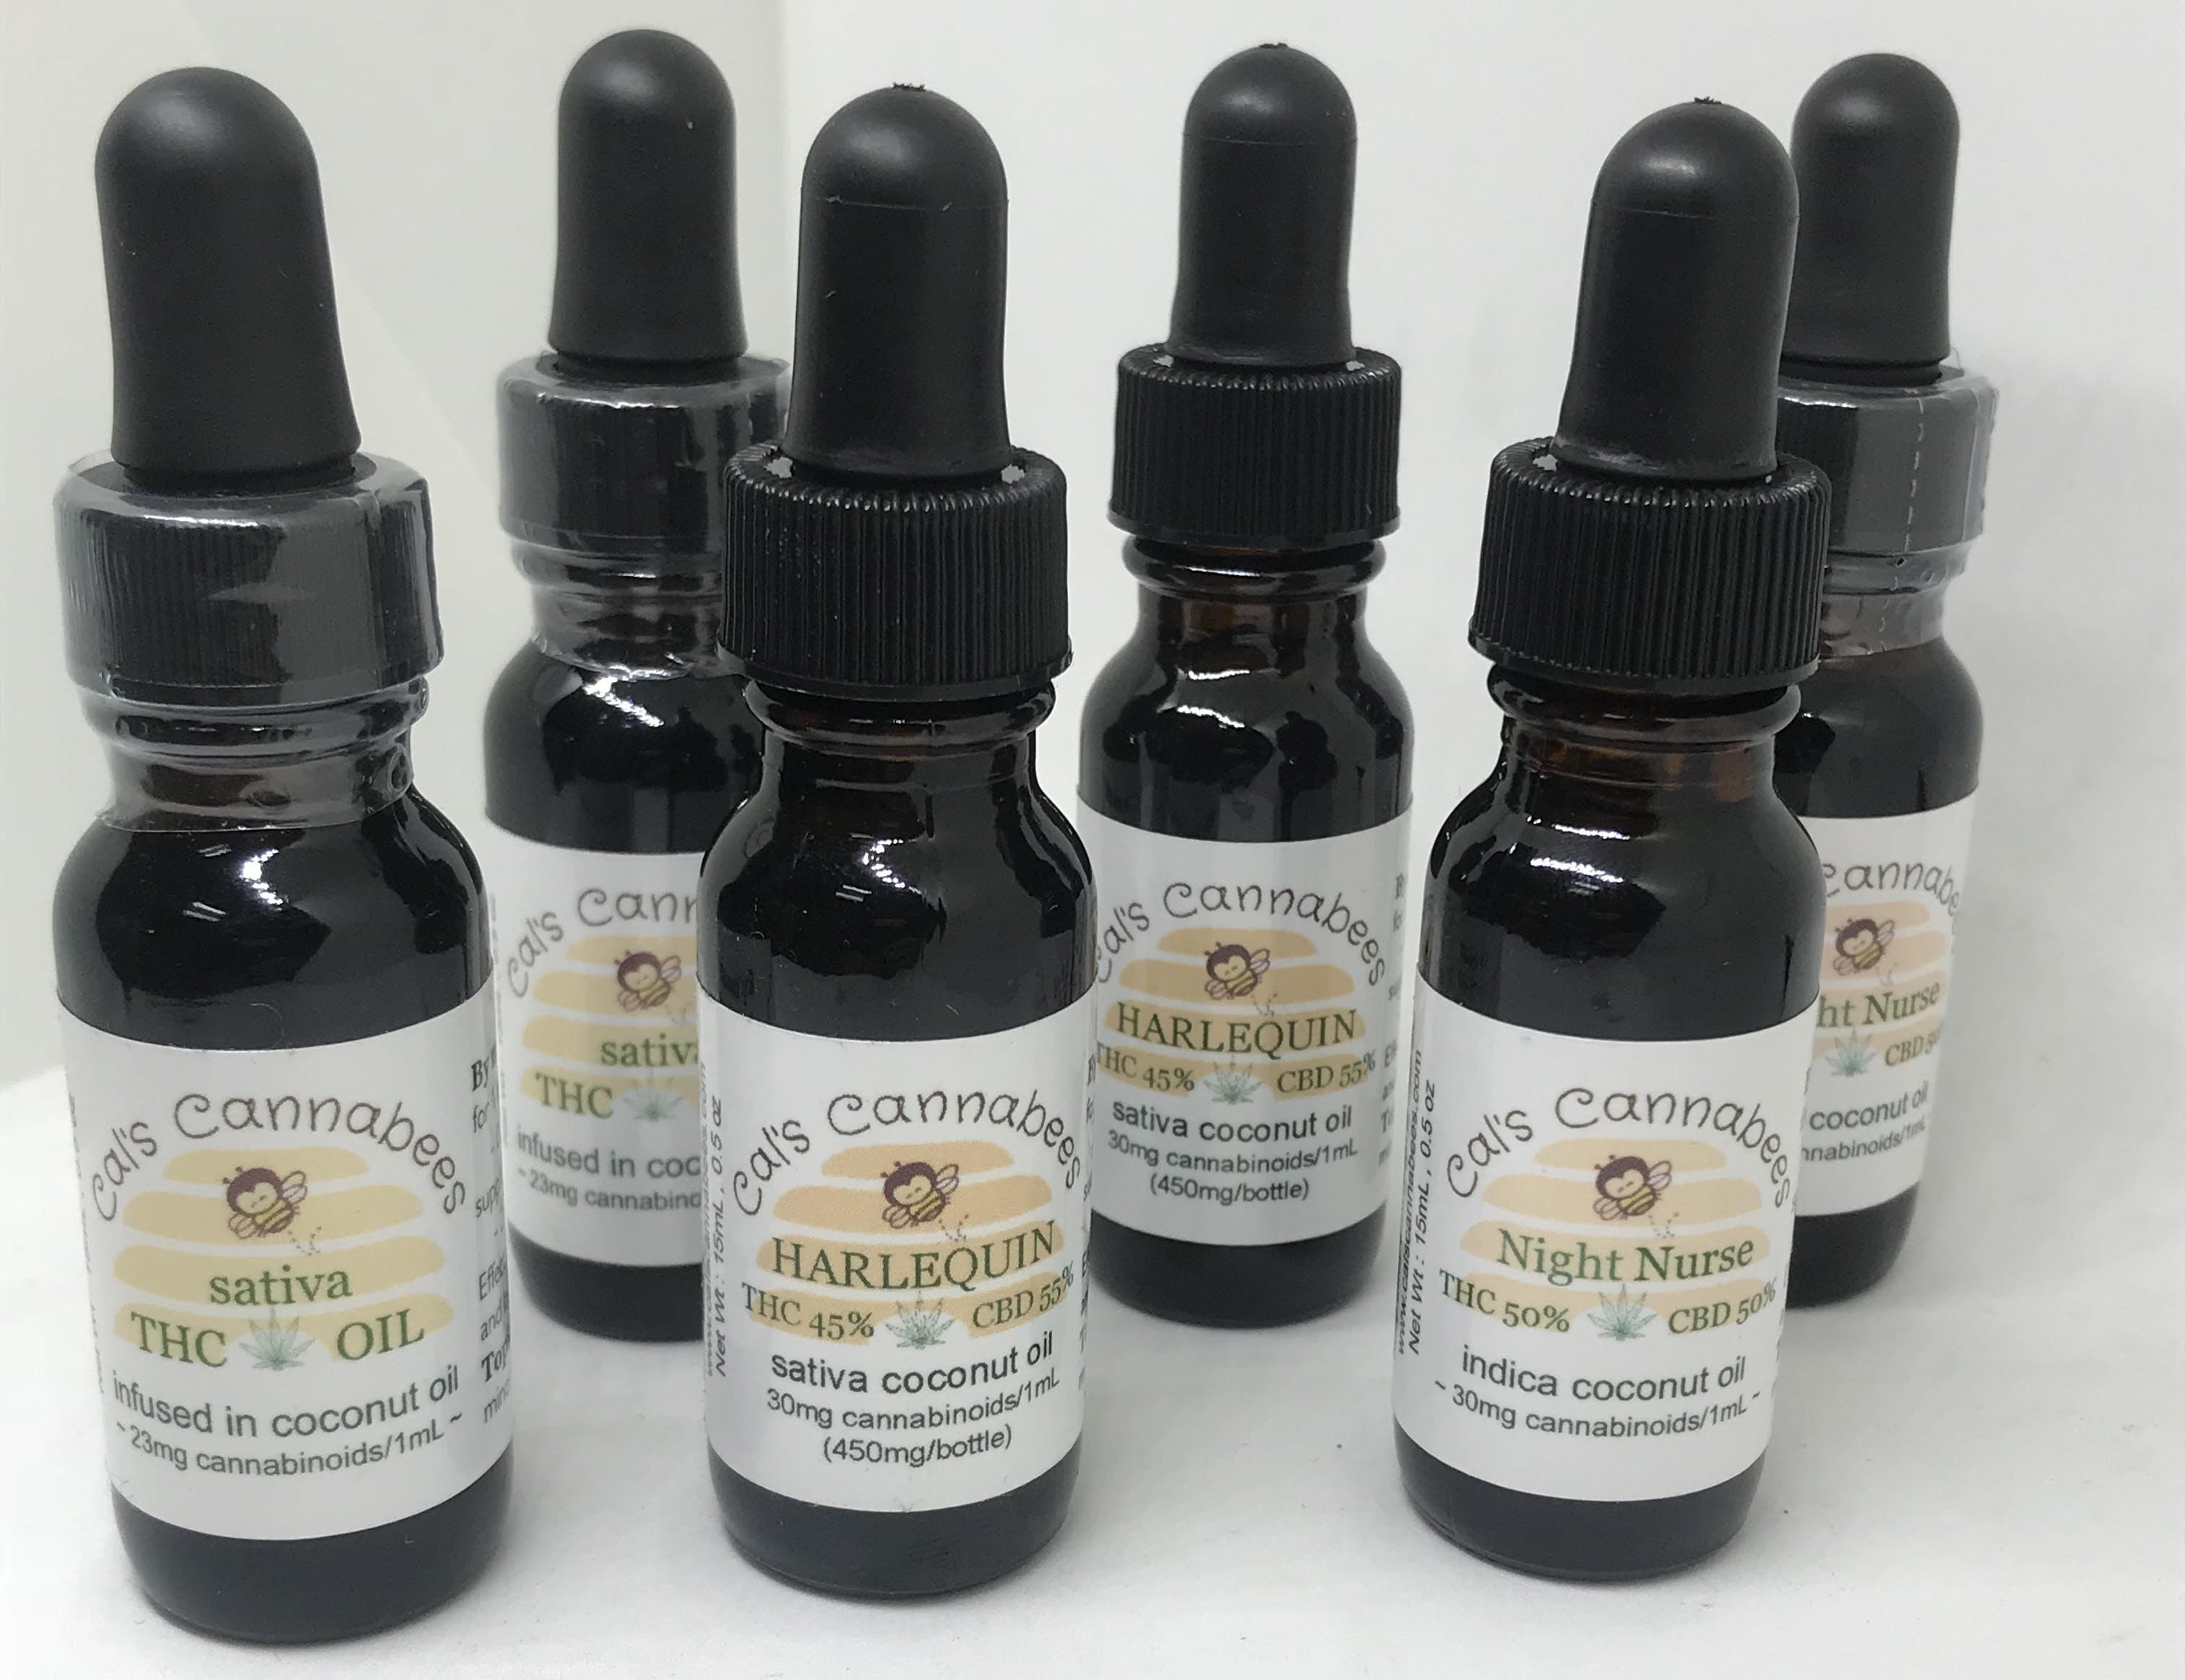 tincture-cals-cannabees-400mg-thccbd-oil